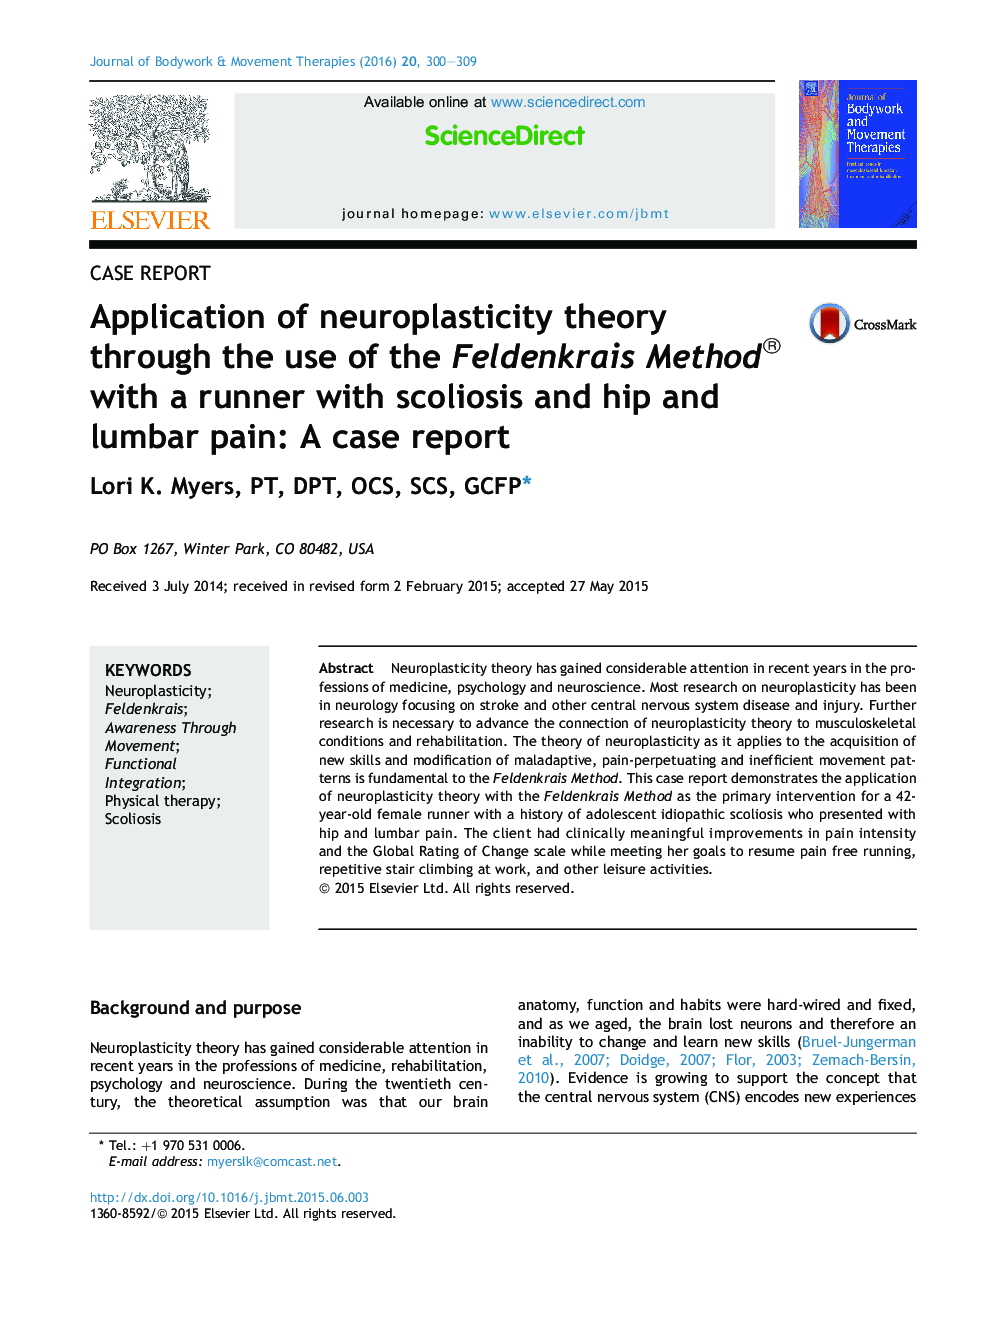 Application of neuroplasticity theory through the use of the Feldenkrais Method® with a runner with scoliosis and hip and lumbar pain: A case report